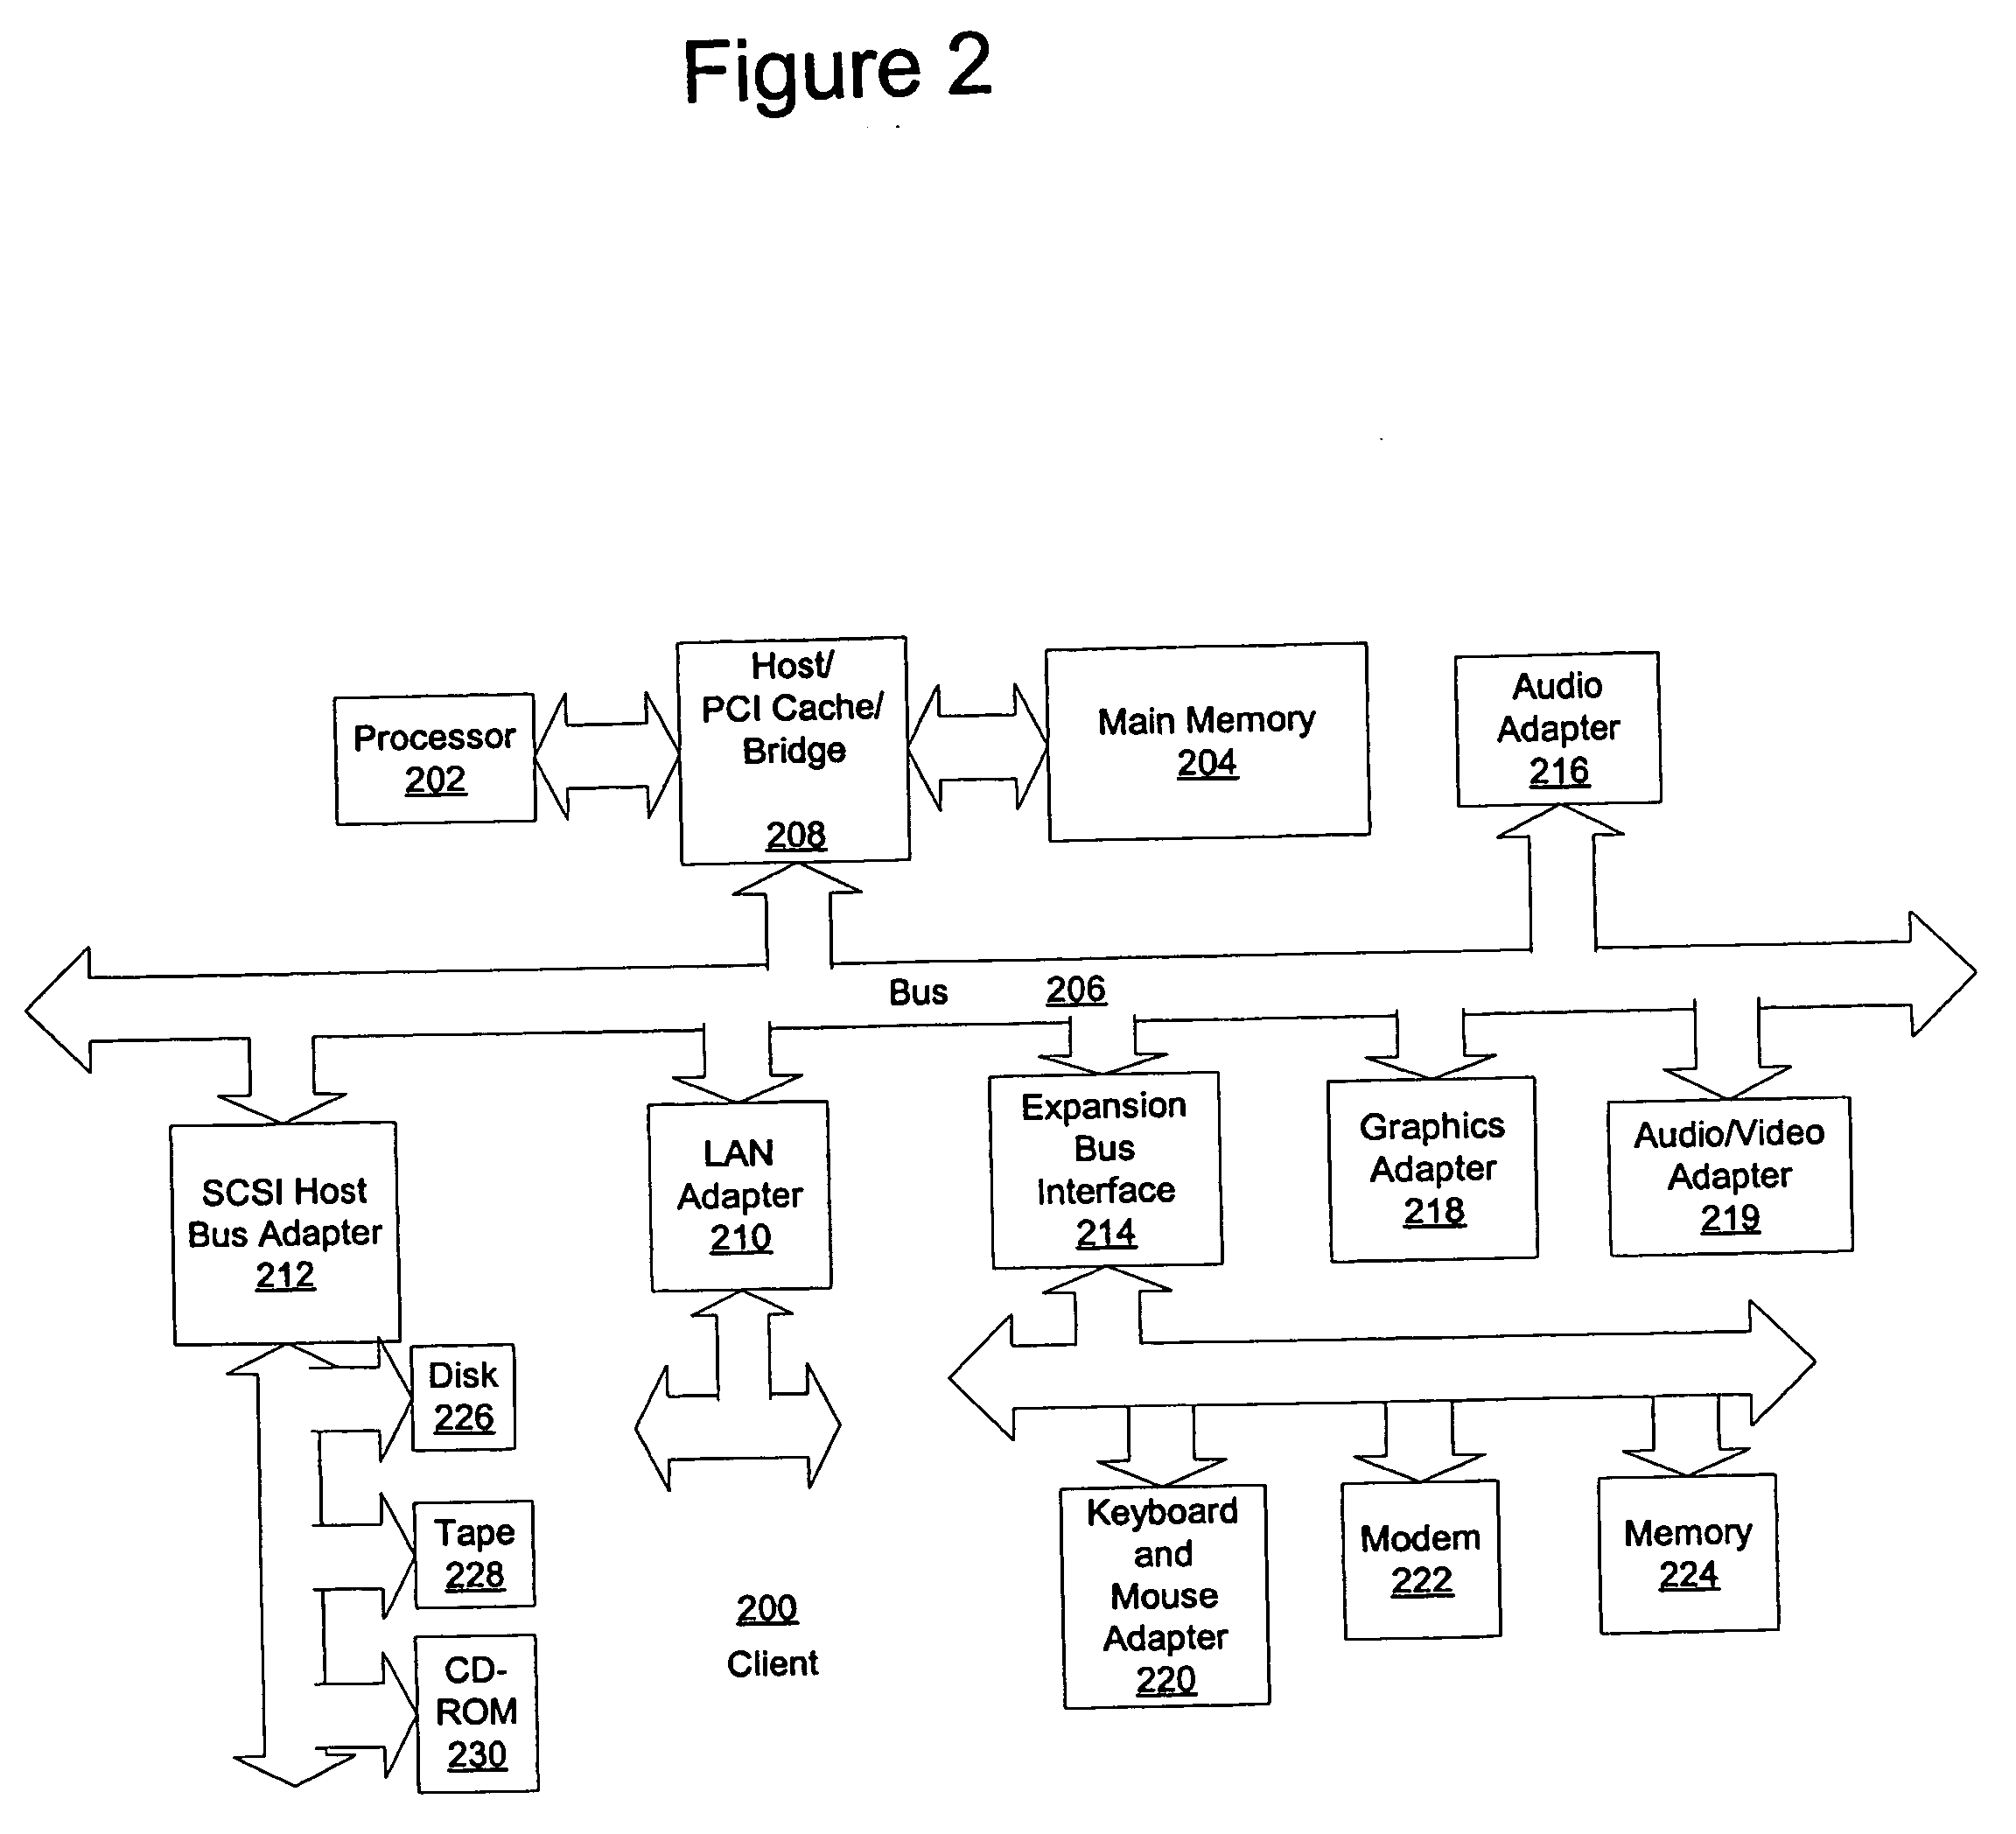 Method and apparatus for restricting a fan-out search in a peer-to-peer network based on accessibility of nodes